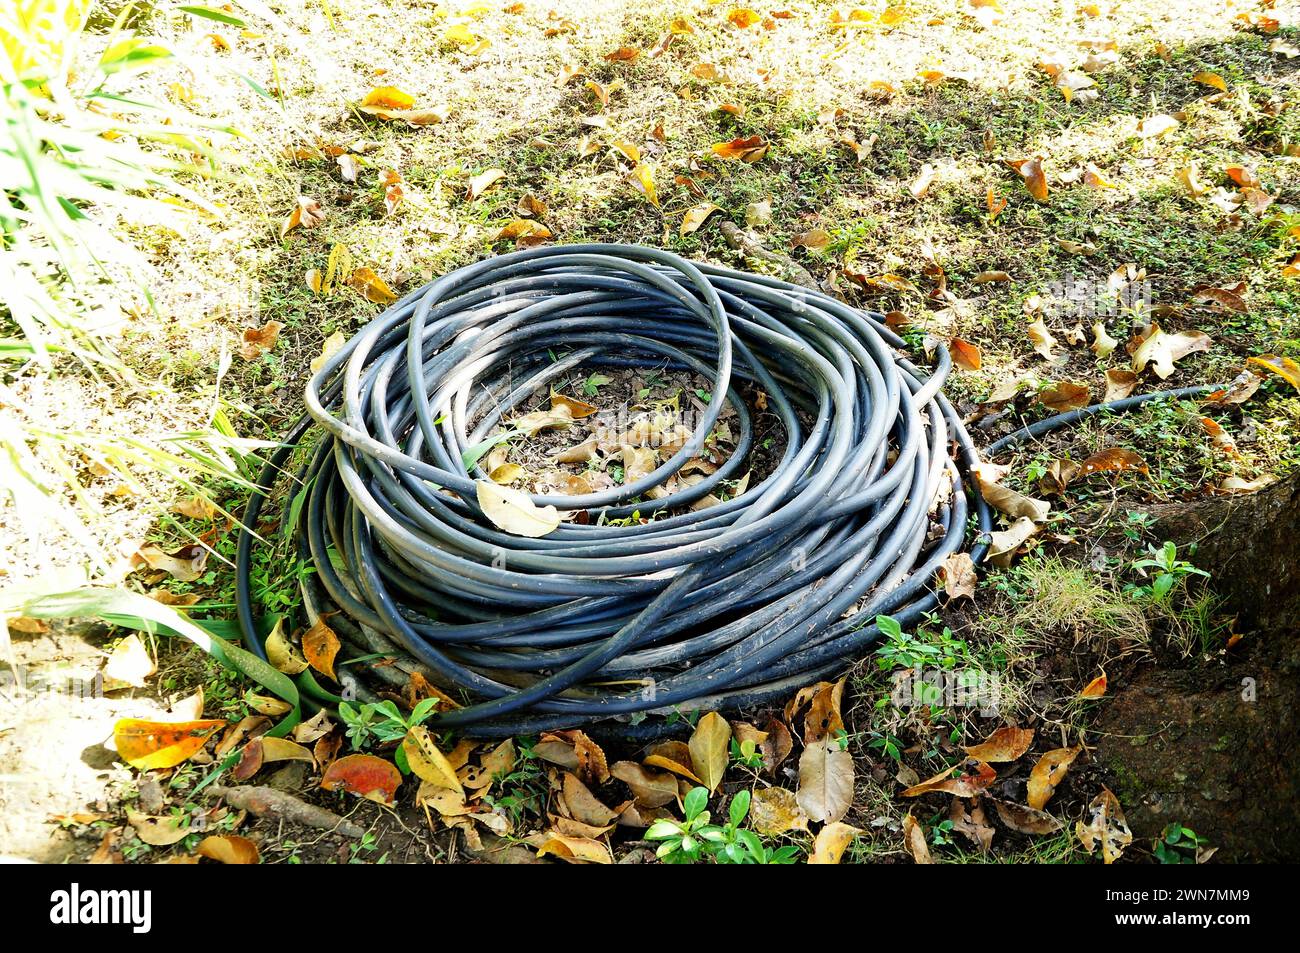 Rolled long garden hose on ground Stock Photo